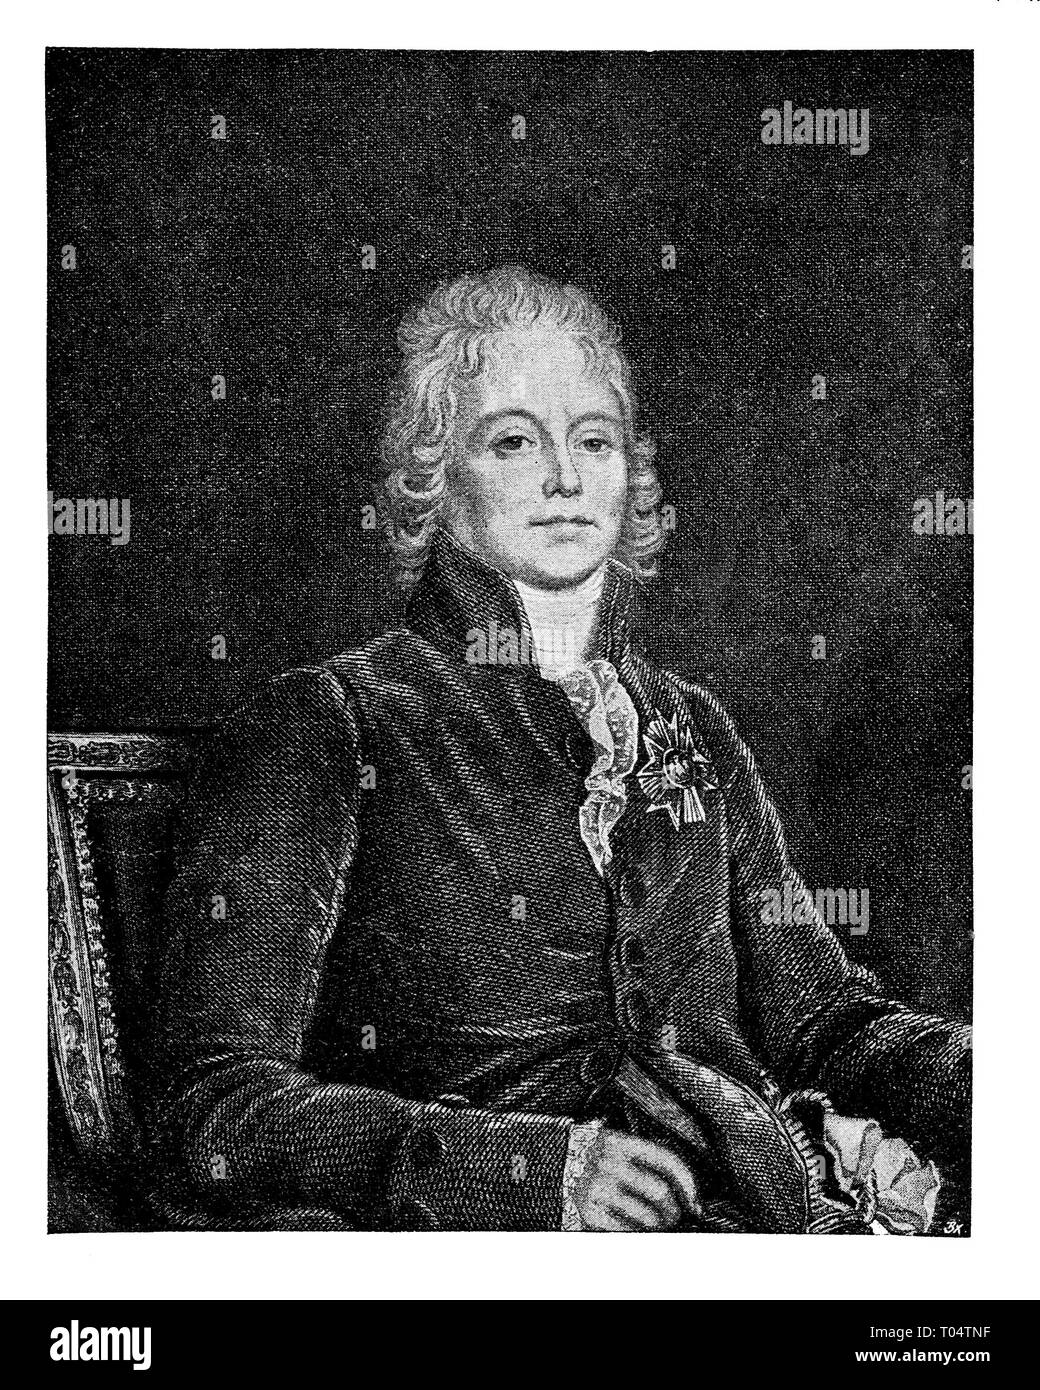 Charles Maurice de Talleyrand-Périgord , Digital improved reproduction from Illustrated overview of the life of mankind in the 19th century, 1901 edition, Marx publishing house, St. Petersburg. Stock Photo